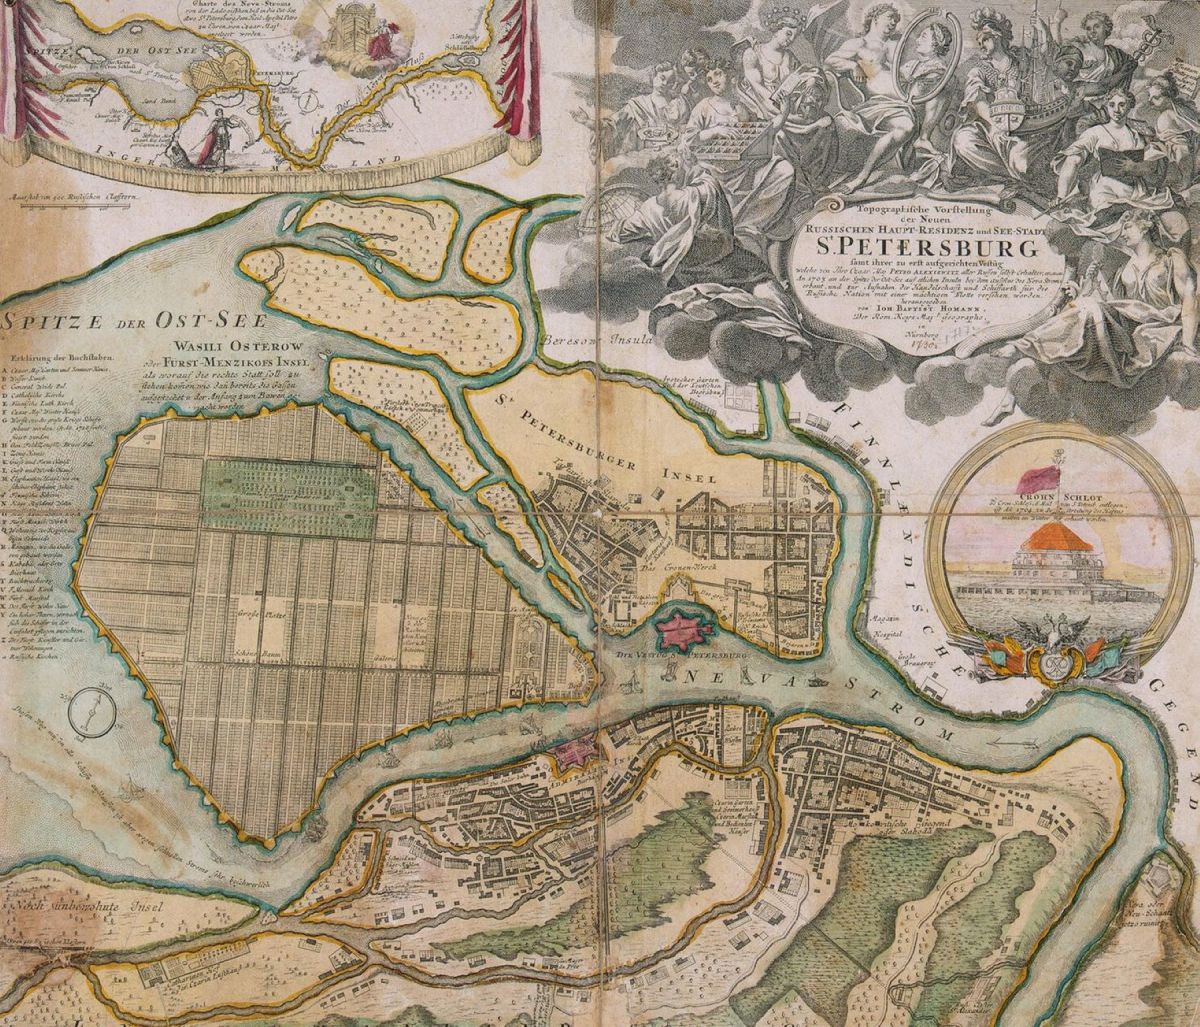 A Map of St. Petersburg from 1720 as Peter the Great's city takes shape.